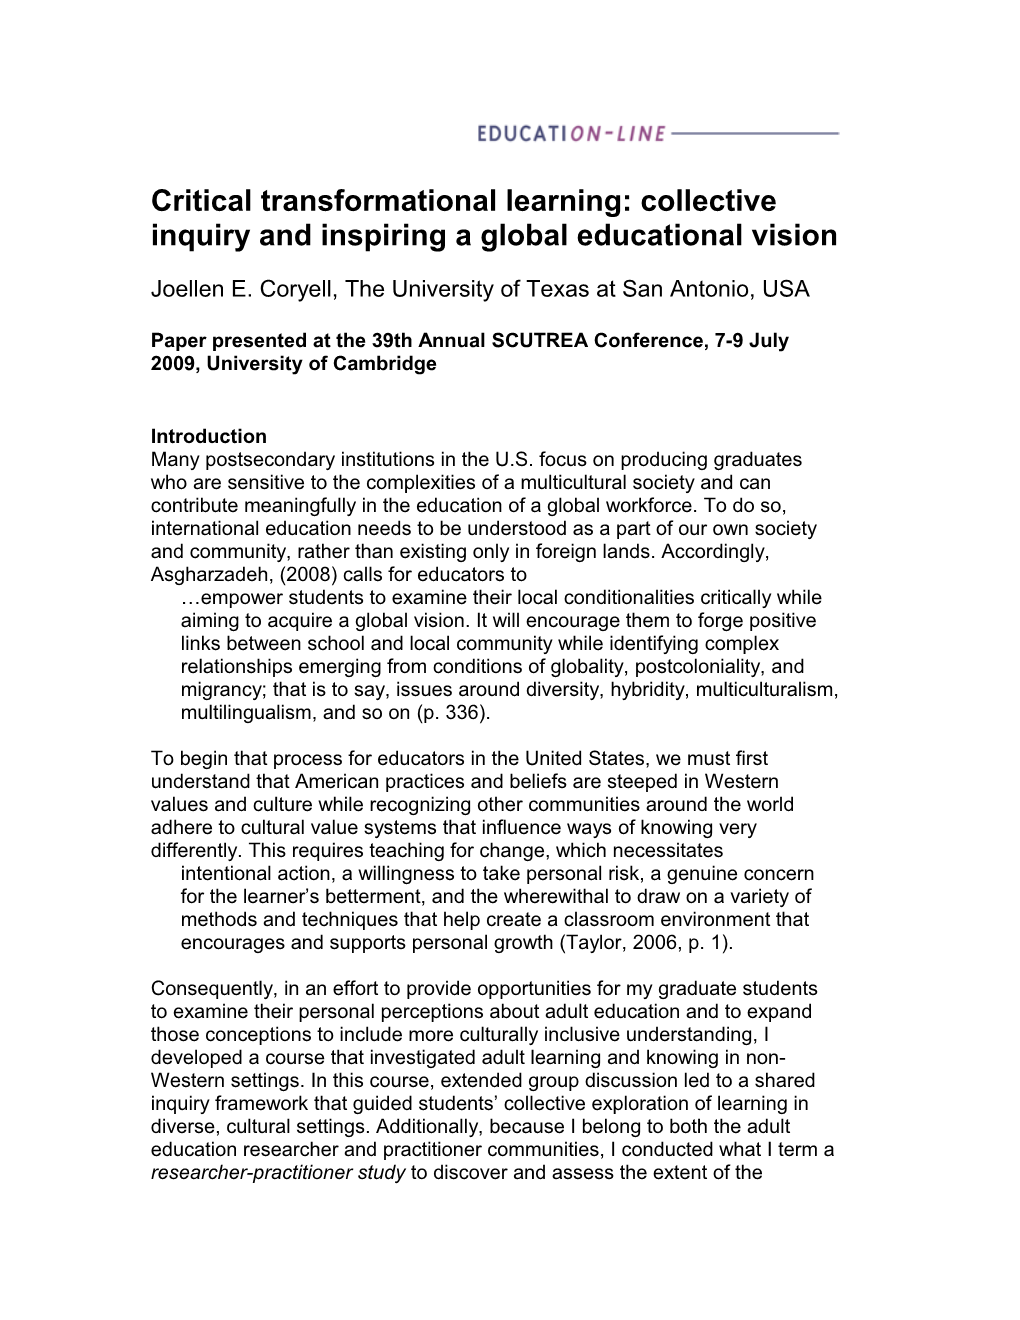 Critical Transformational Learning: Collective Inquiry and Inspiring a Global Educational